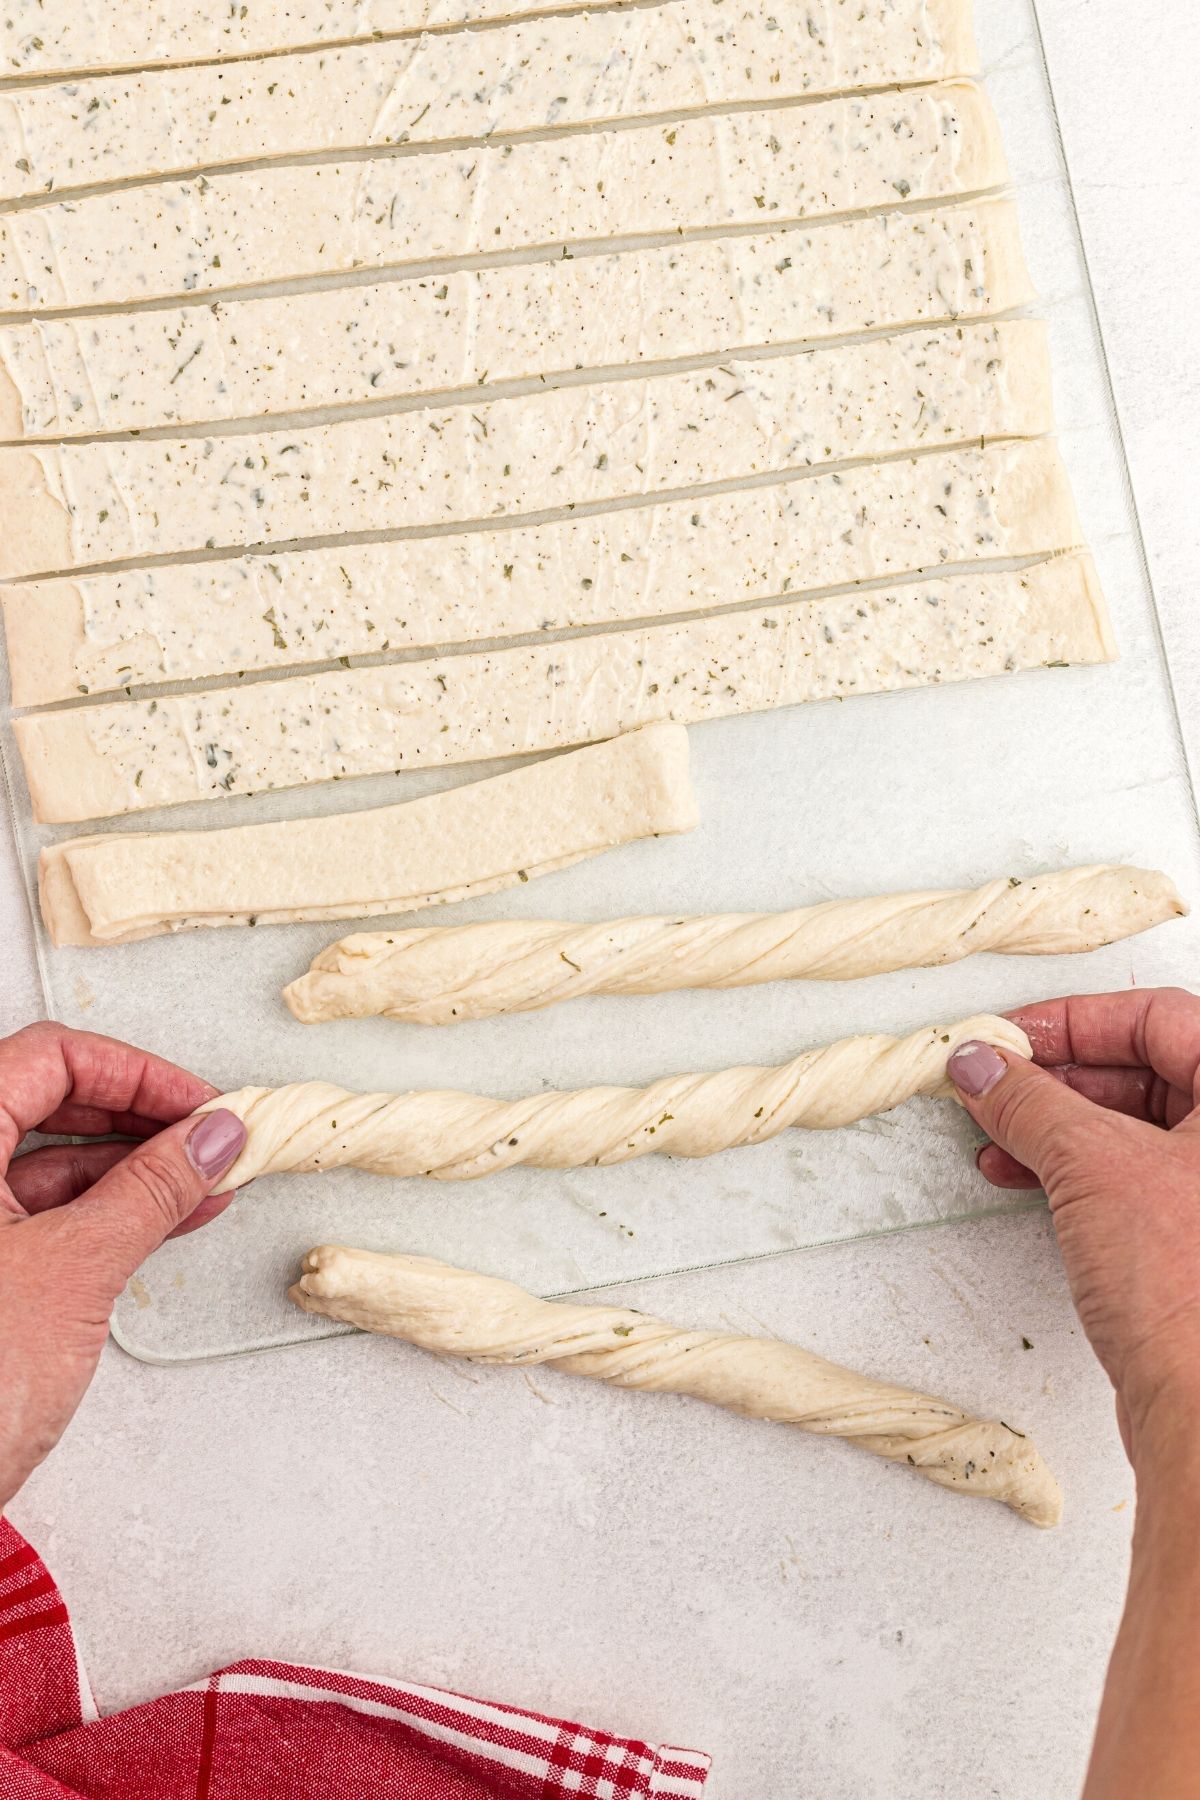 Strips of sough being rolled into breadsticks and twisted